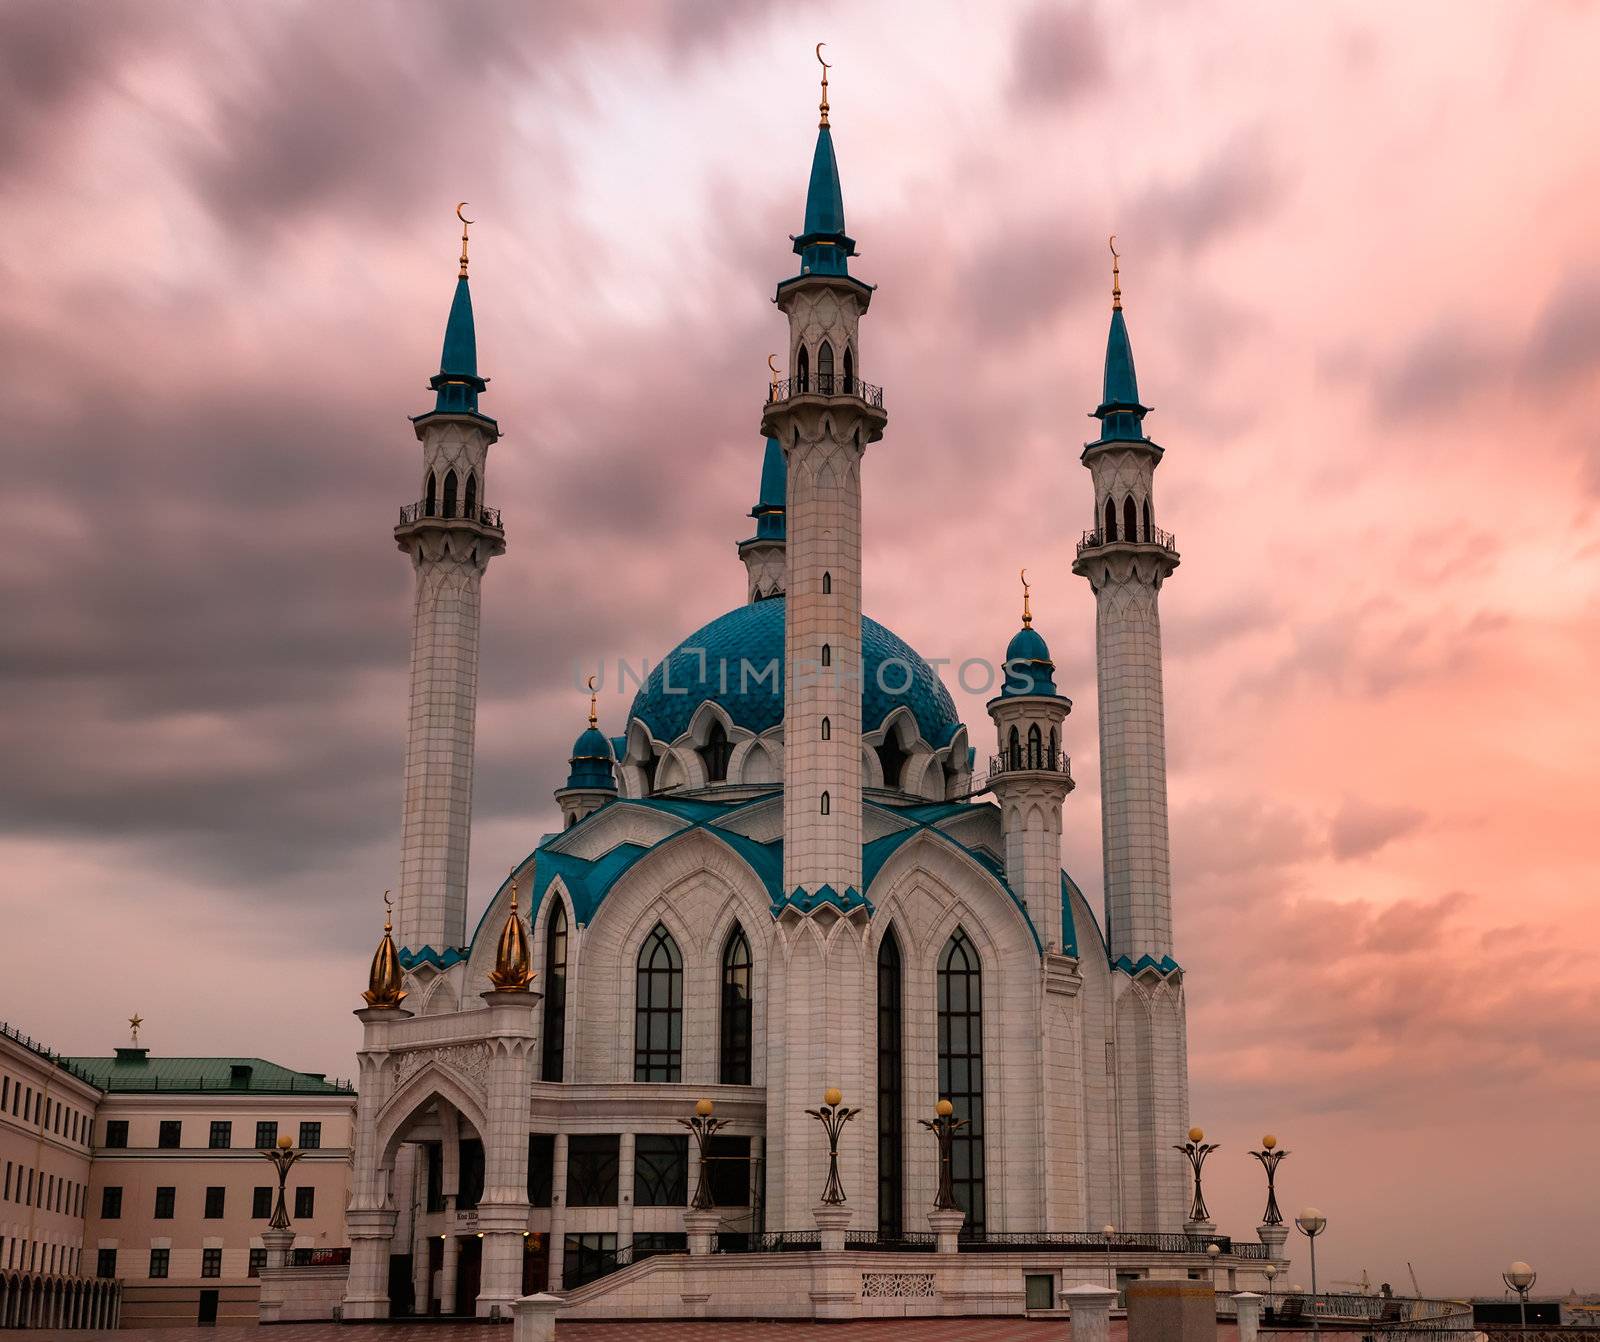 General view of the Kul-Sharif mosque in Kazan, the largest mosque in Russia. Long exposure at sunset.